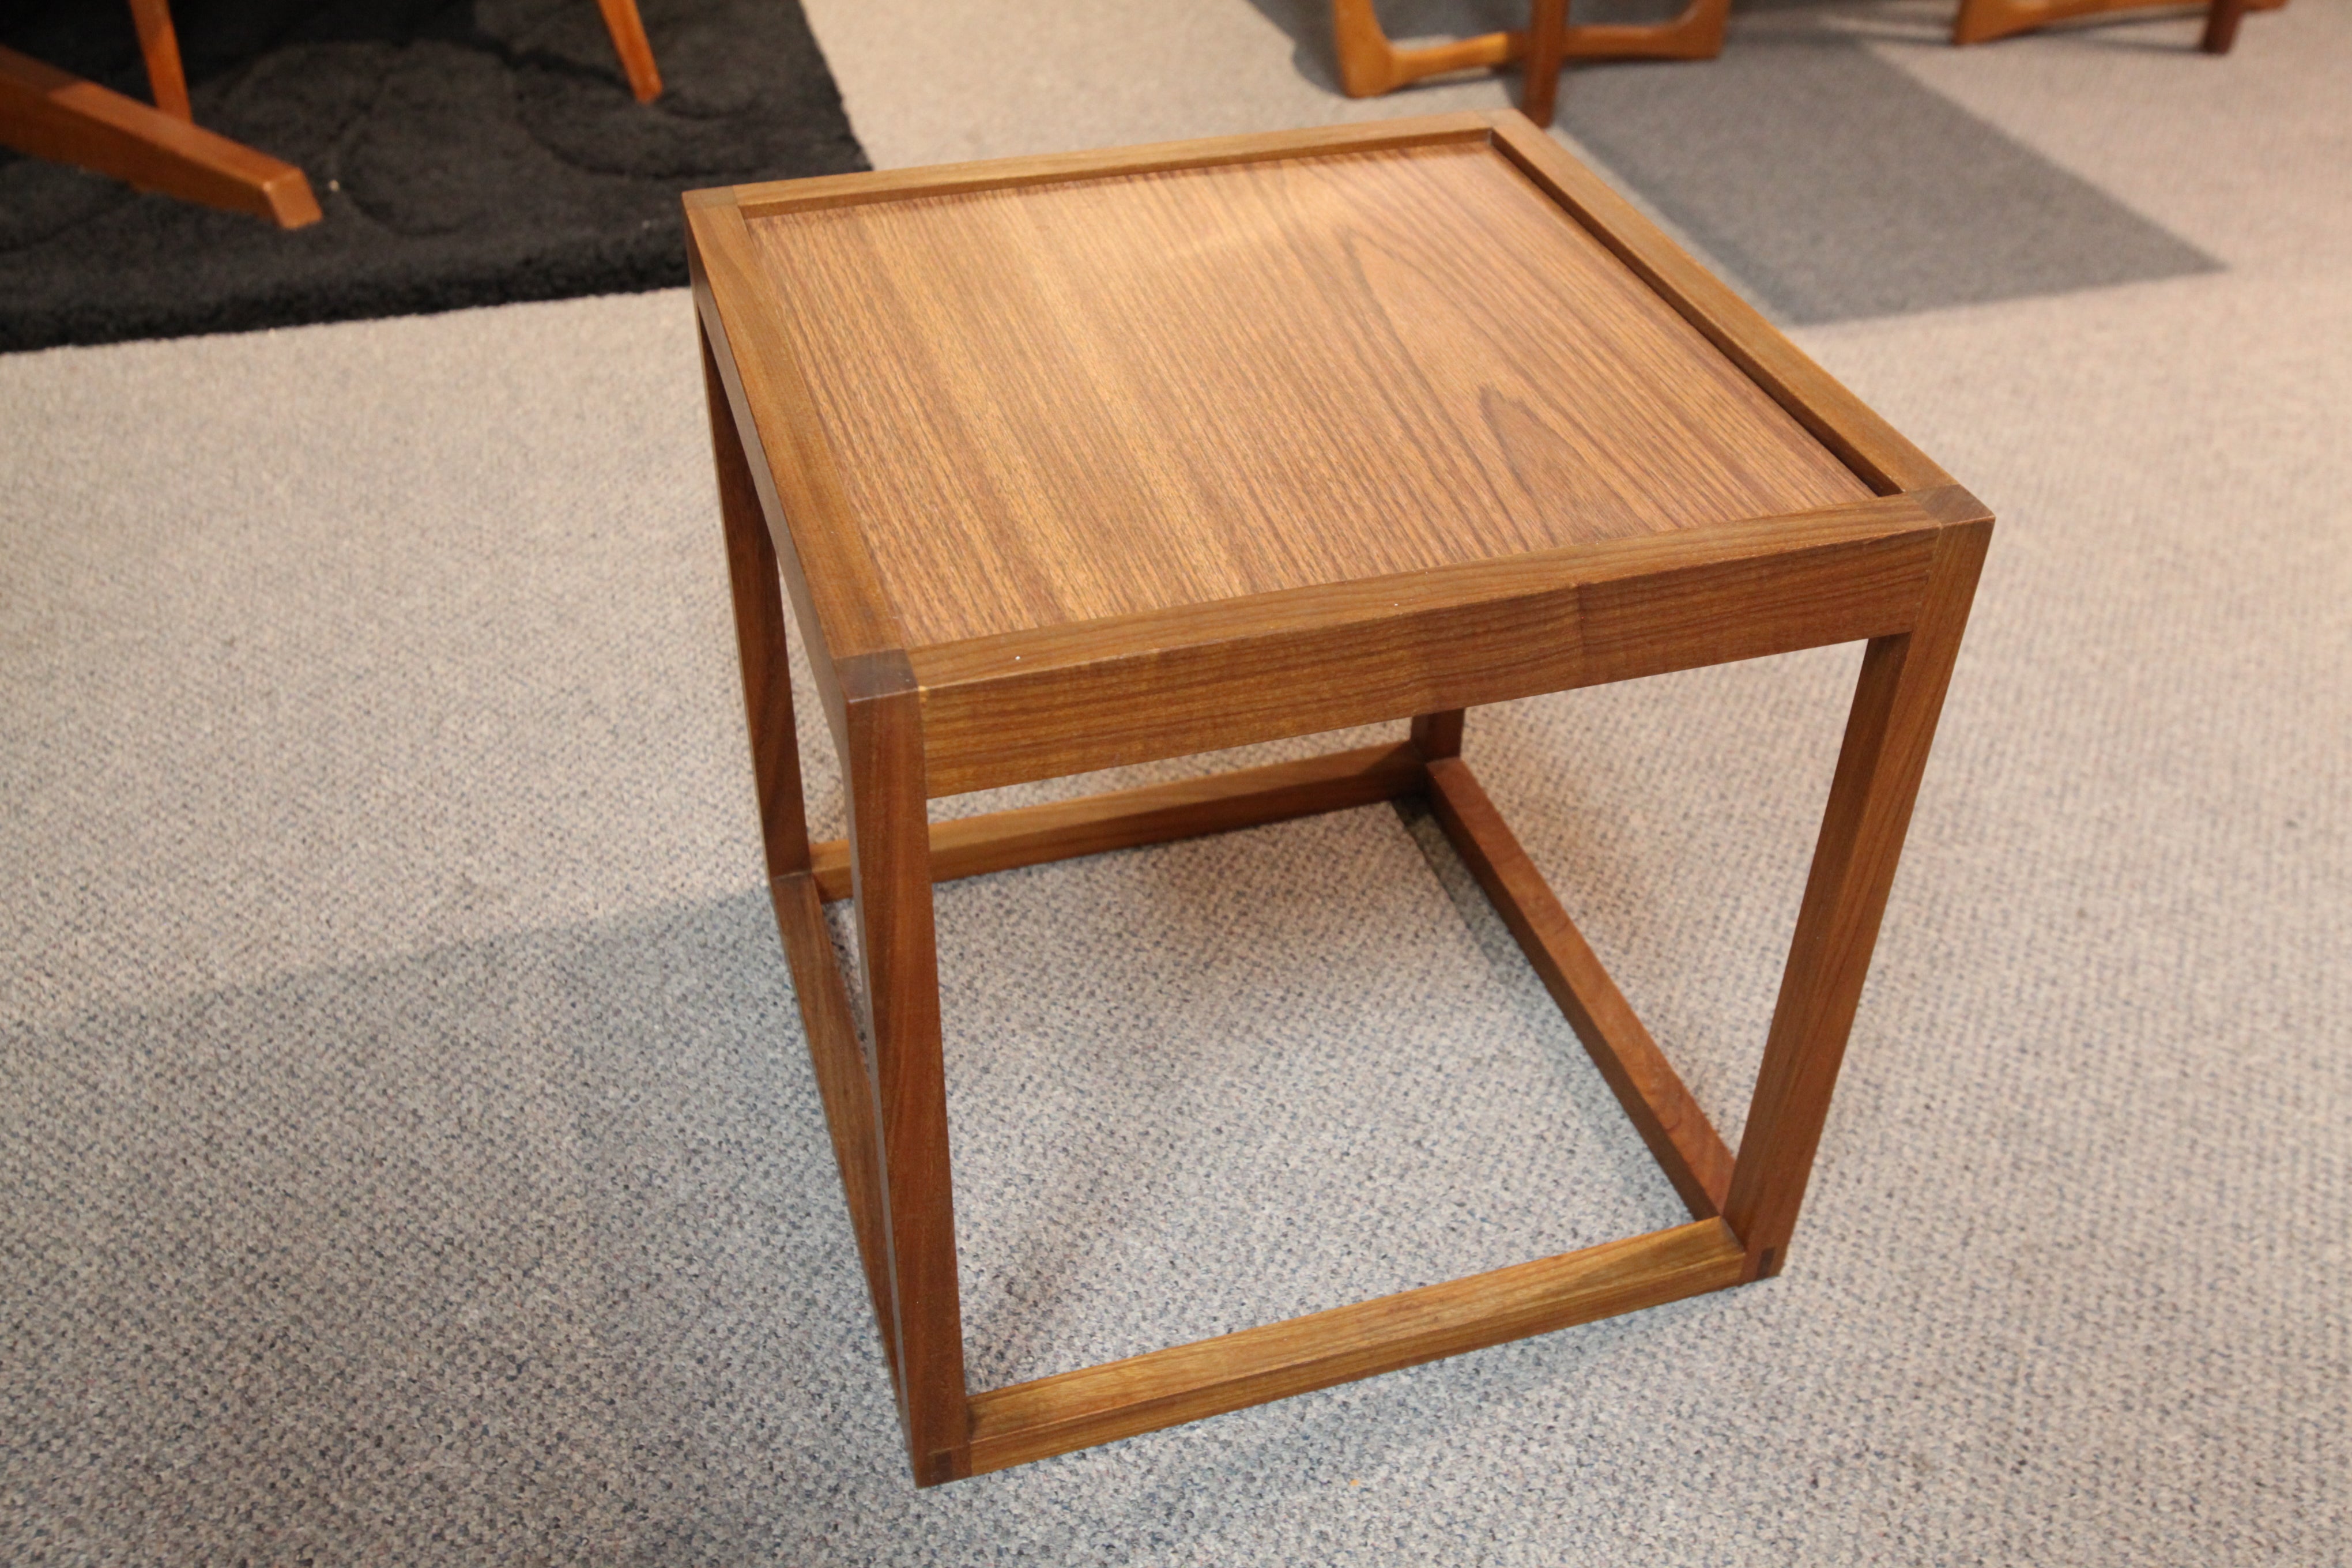 Vintage Small Teak Side Table w/ Reversible Top (16" x 16" x 16"H)